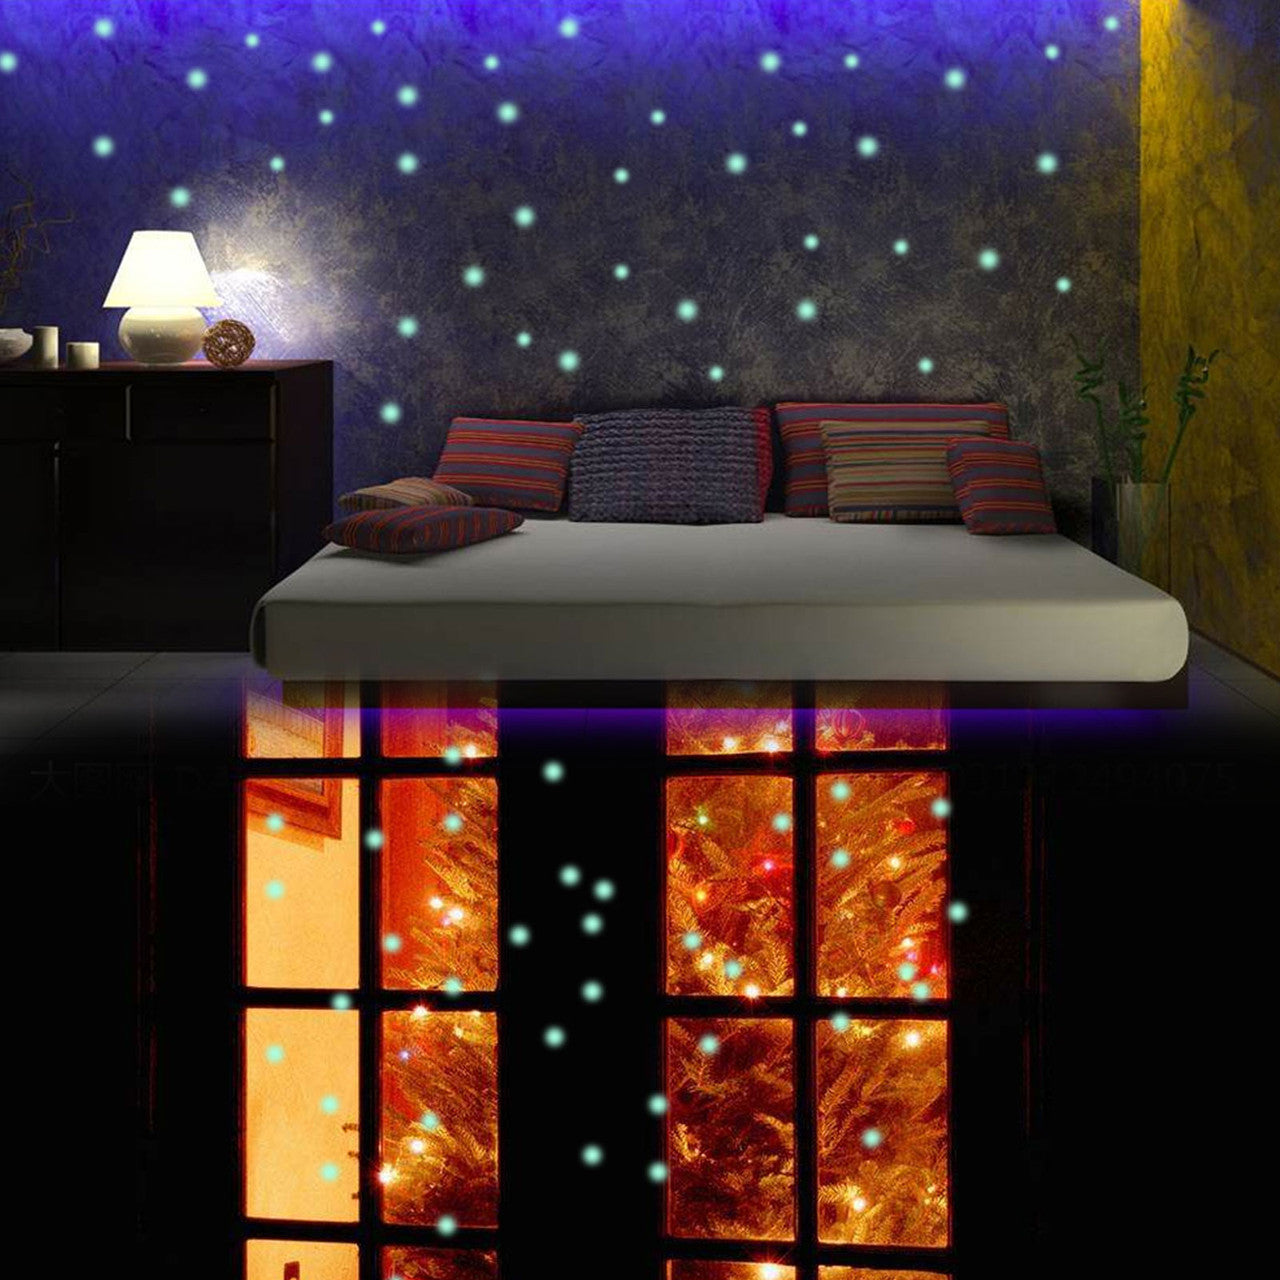 Glow in the Dark Stars for Kids/Children Bedroom Walls & Ceiling of Starry Night Sky, Adhesive Decals & Dots Tested & Proven Very Sticky, 400-pack